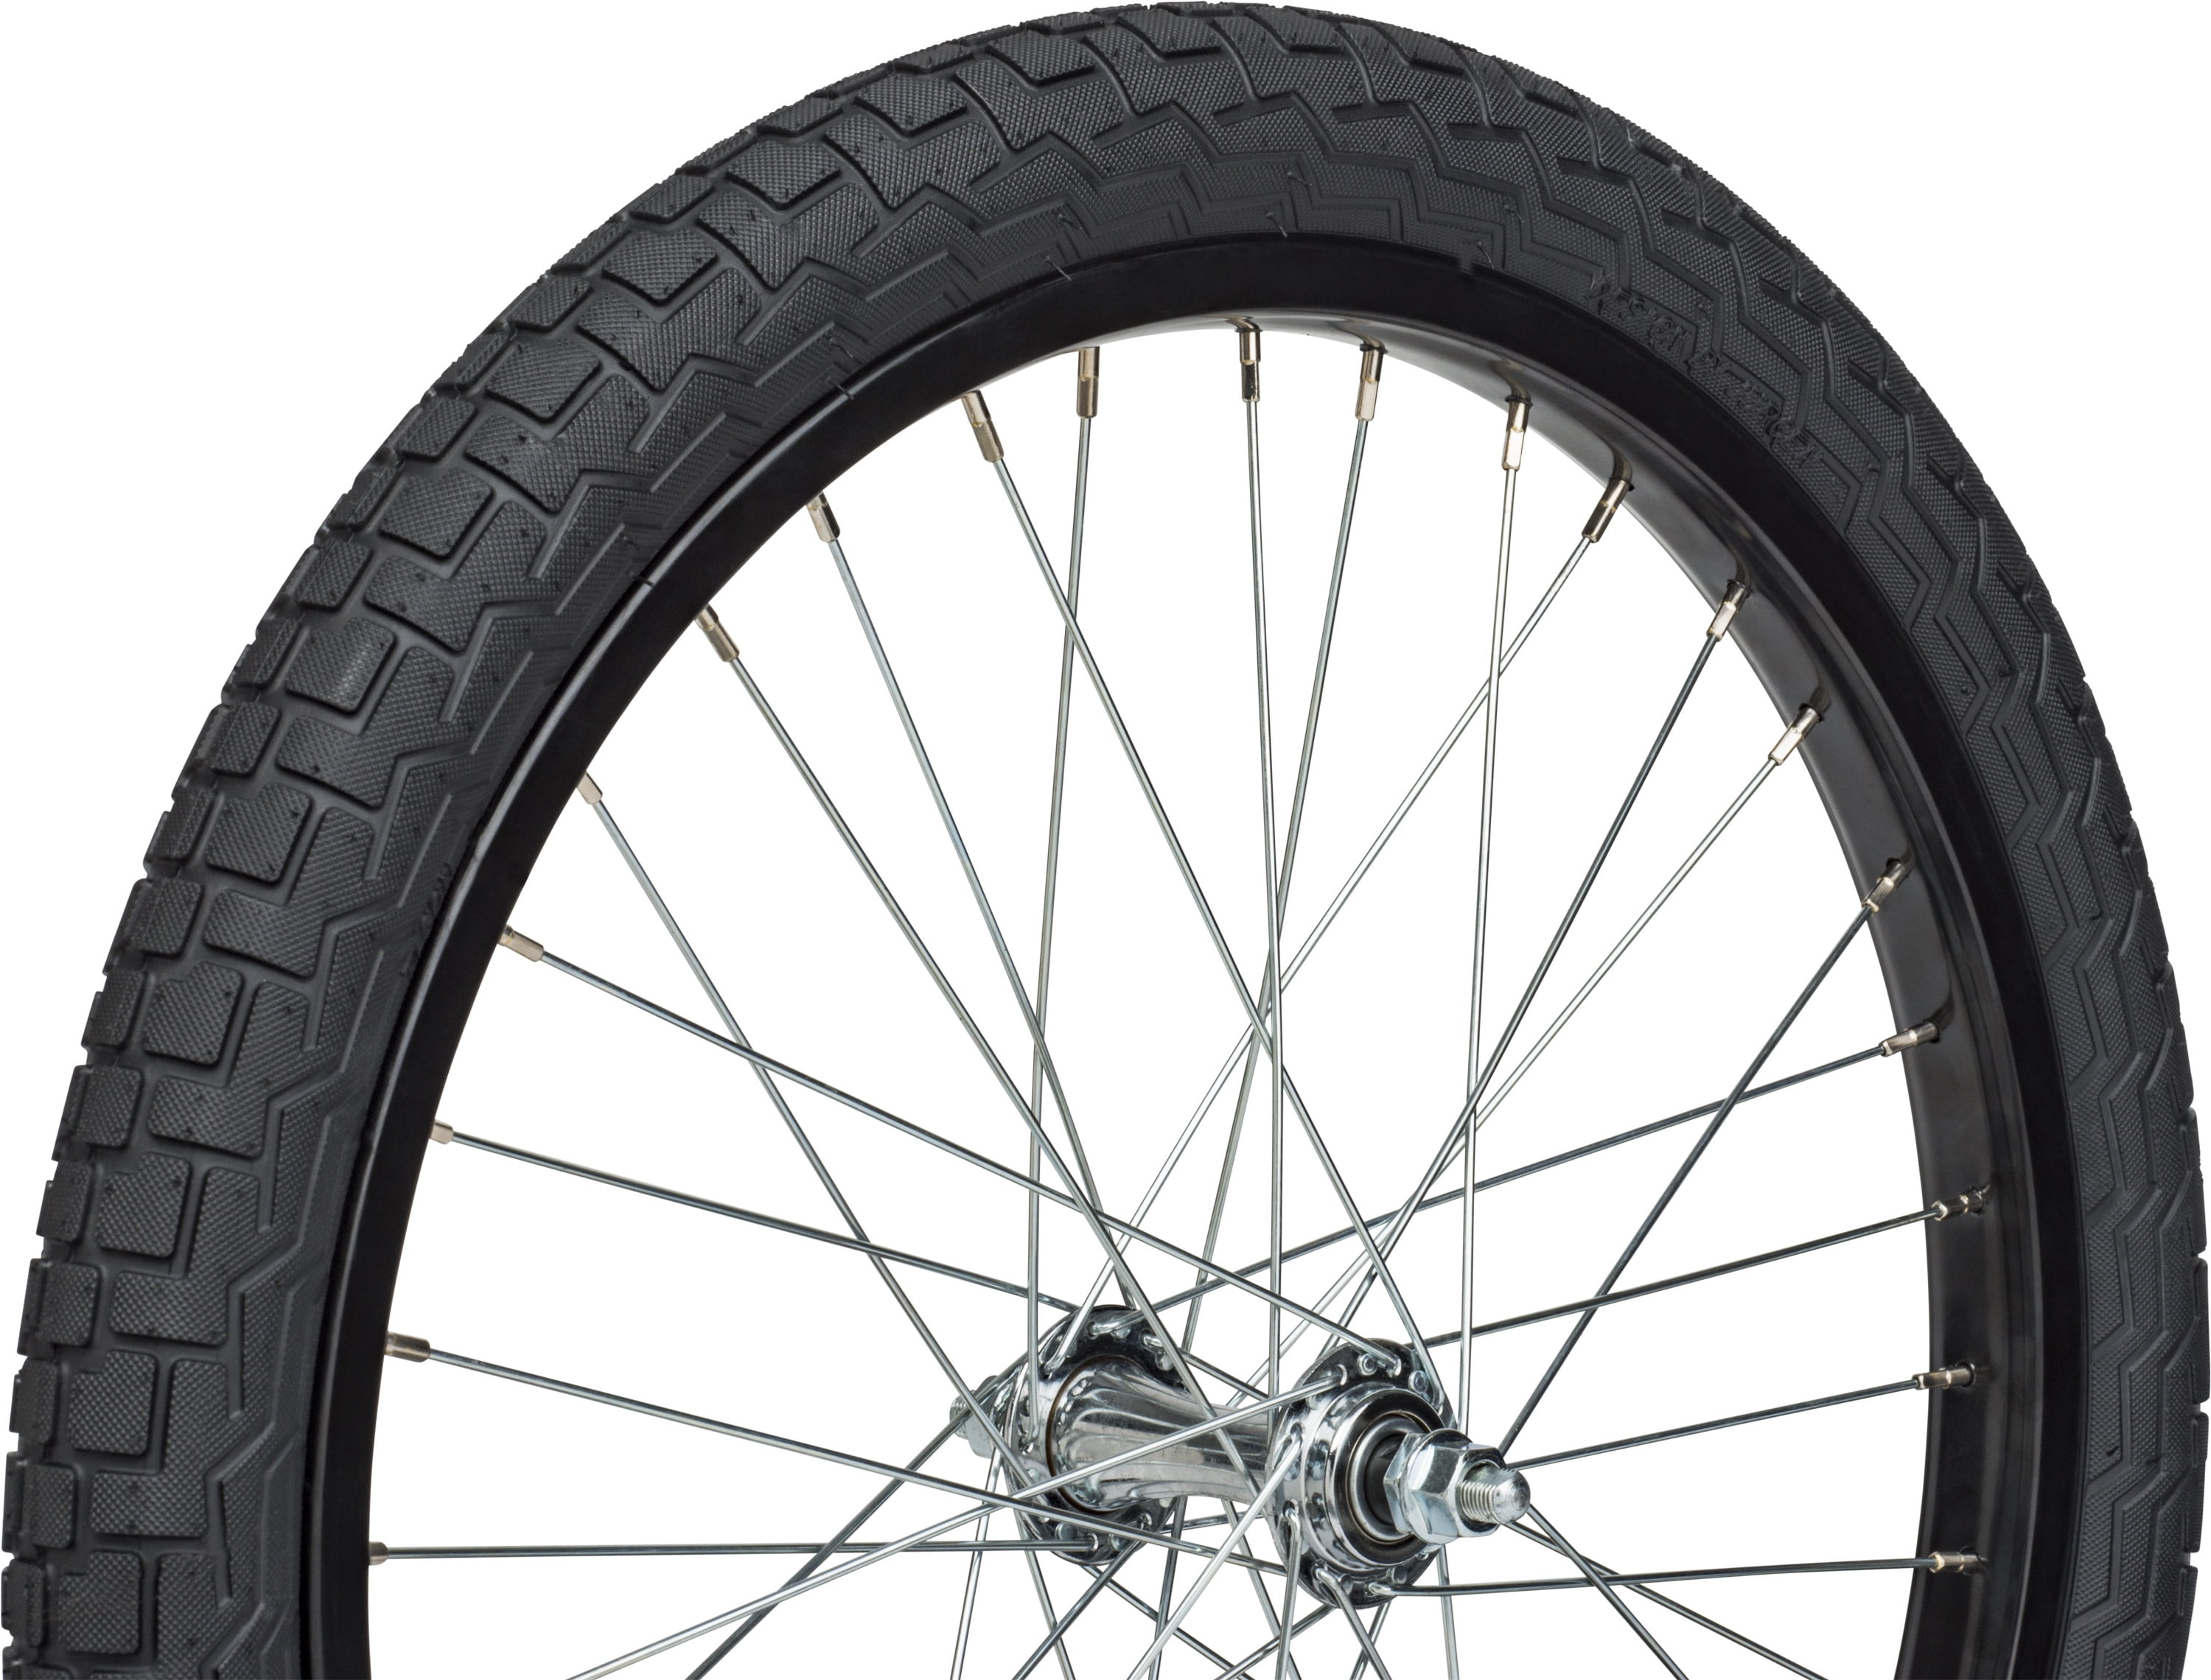 2x Bell 20 Inch X 2.0 Freestyle BMX Bike Bicycle Tire for sale online 